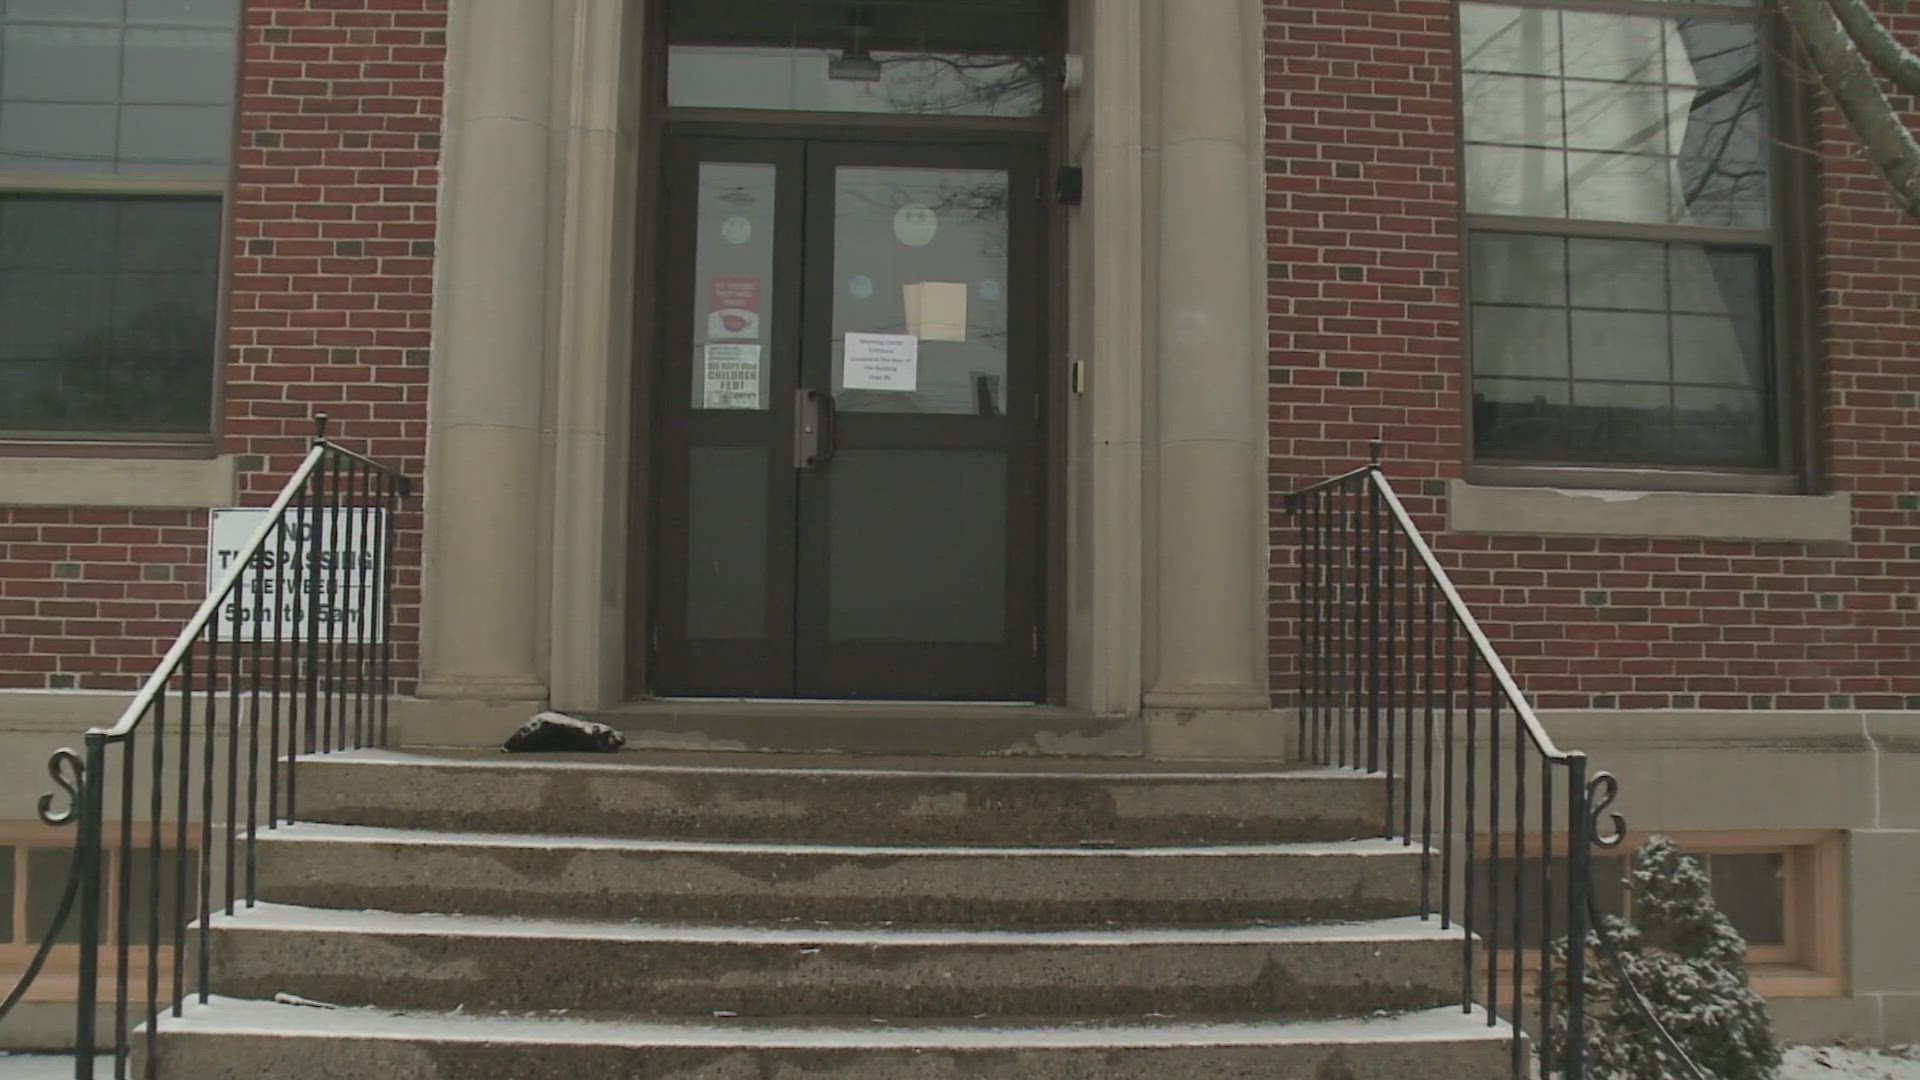 The shelter is located at the former Lafayette School on Brook Street, and it's open 24/7.